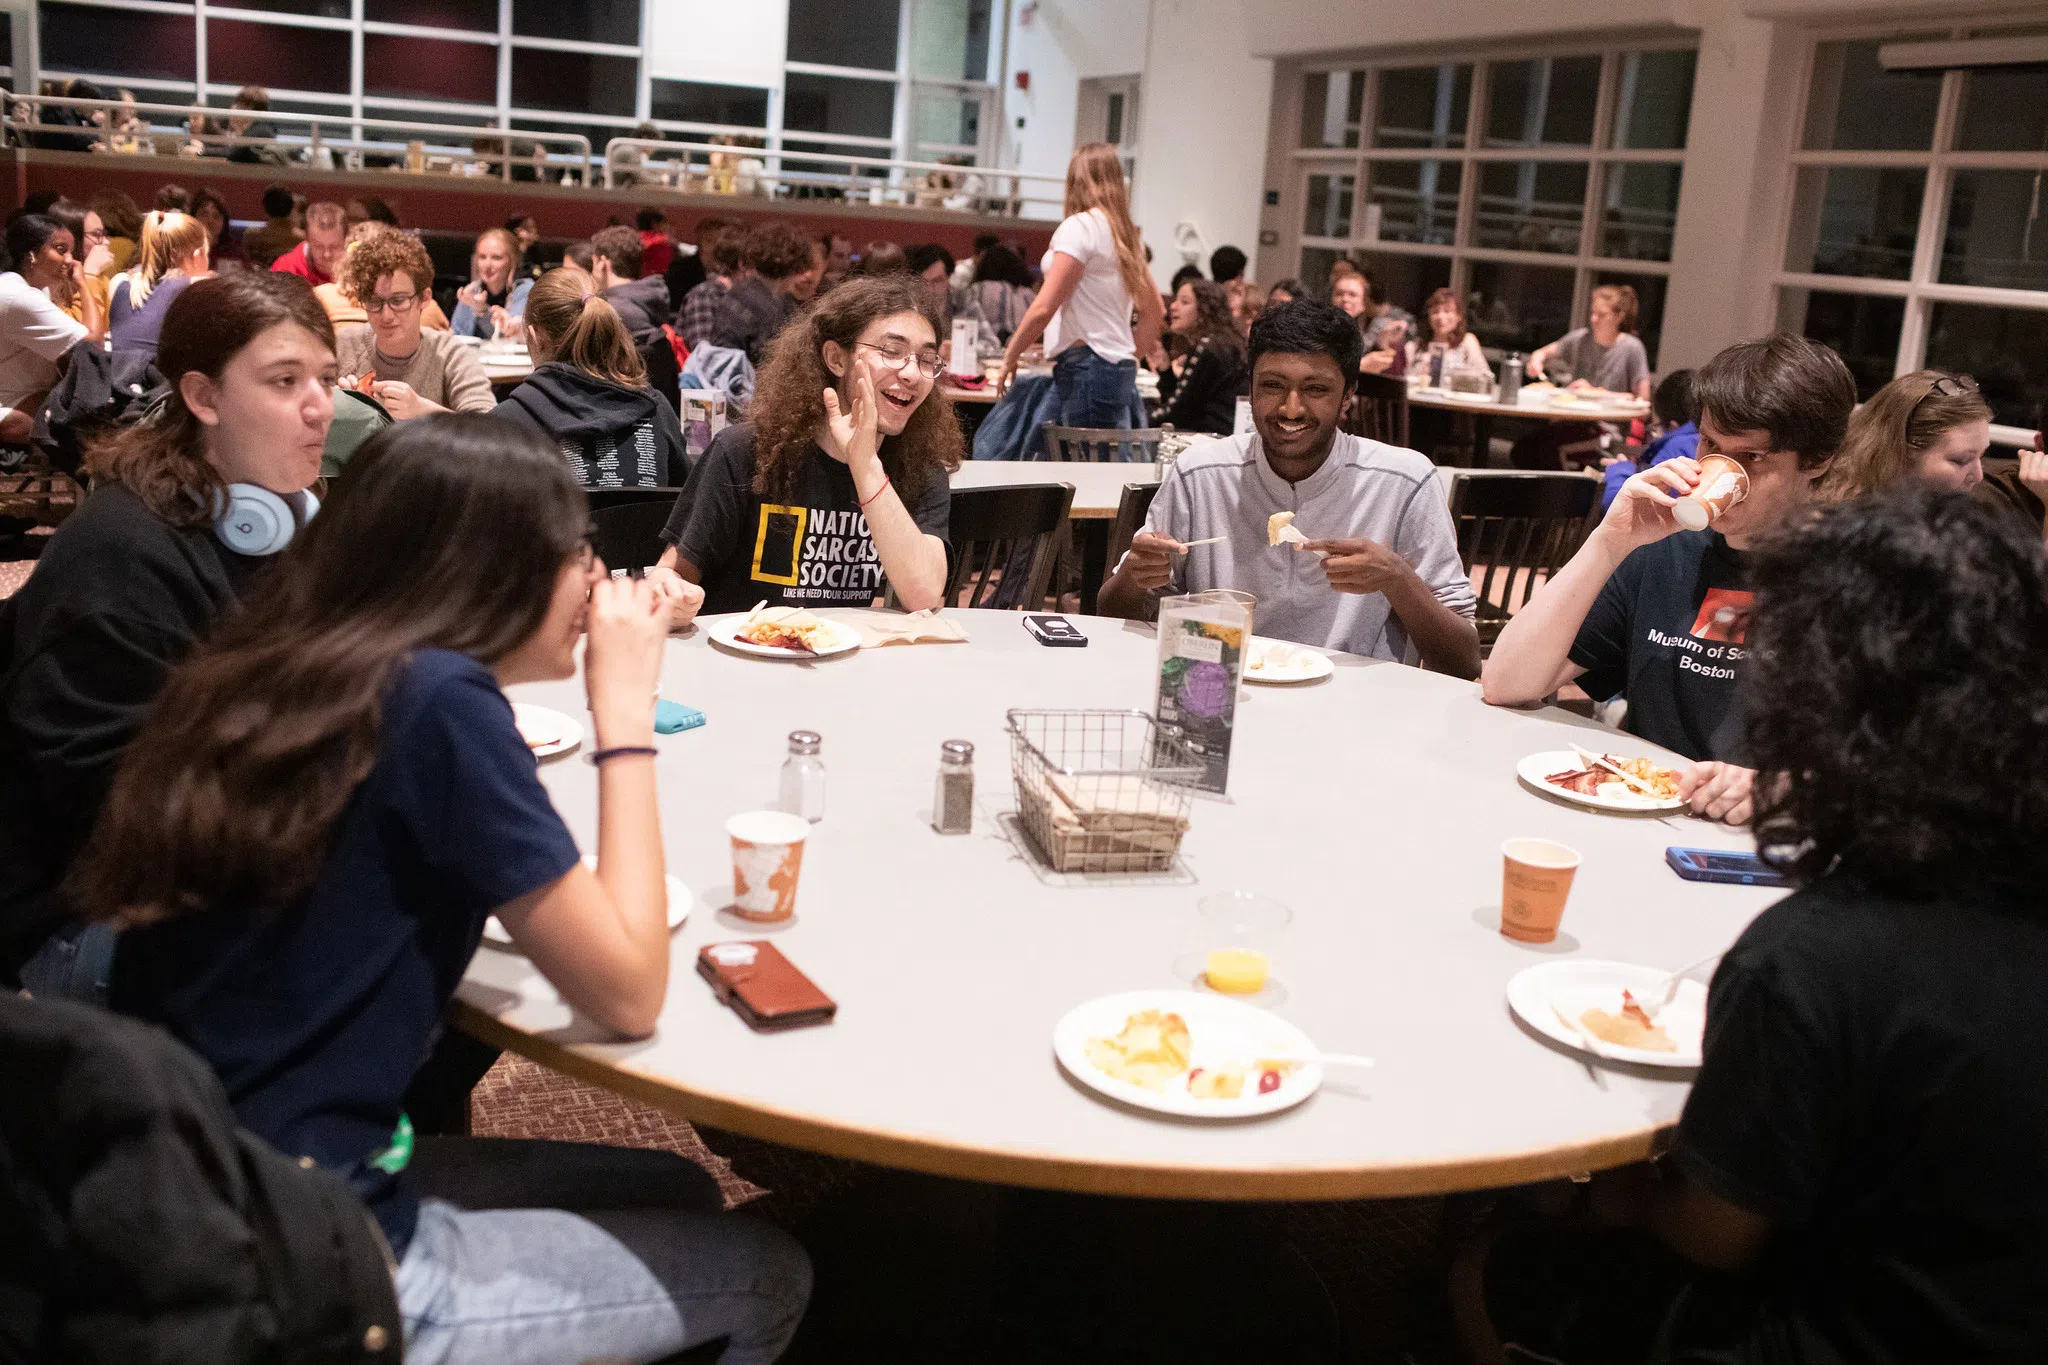 Students laugh and enjoy their meal at a table in Stevenson dining hall.